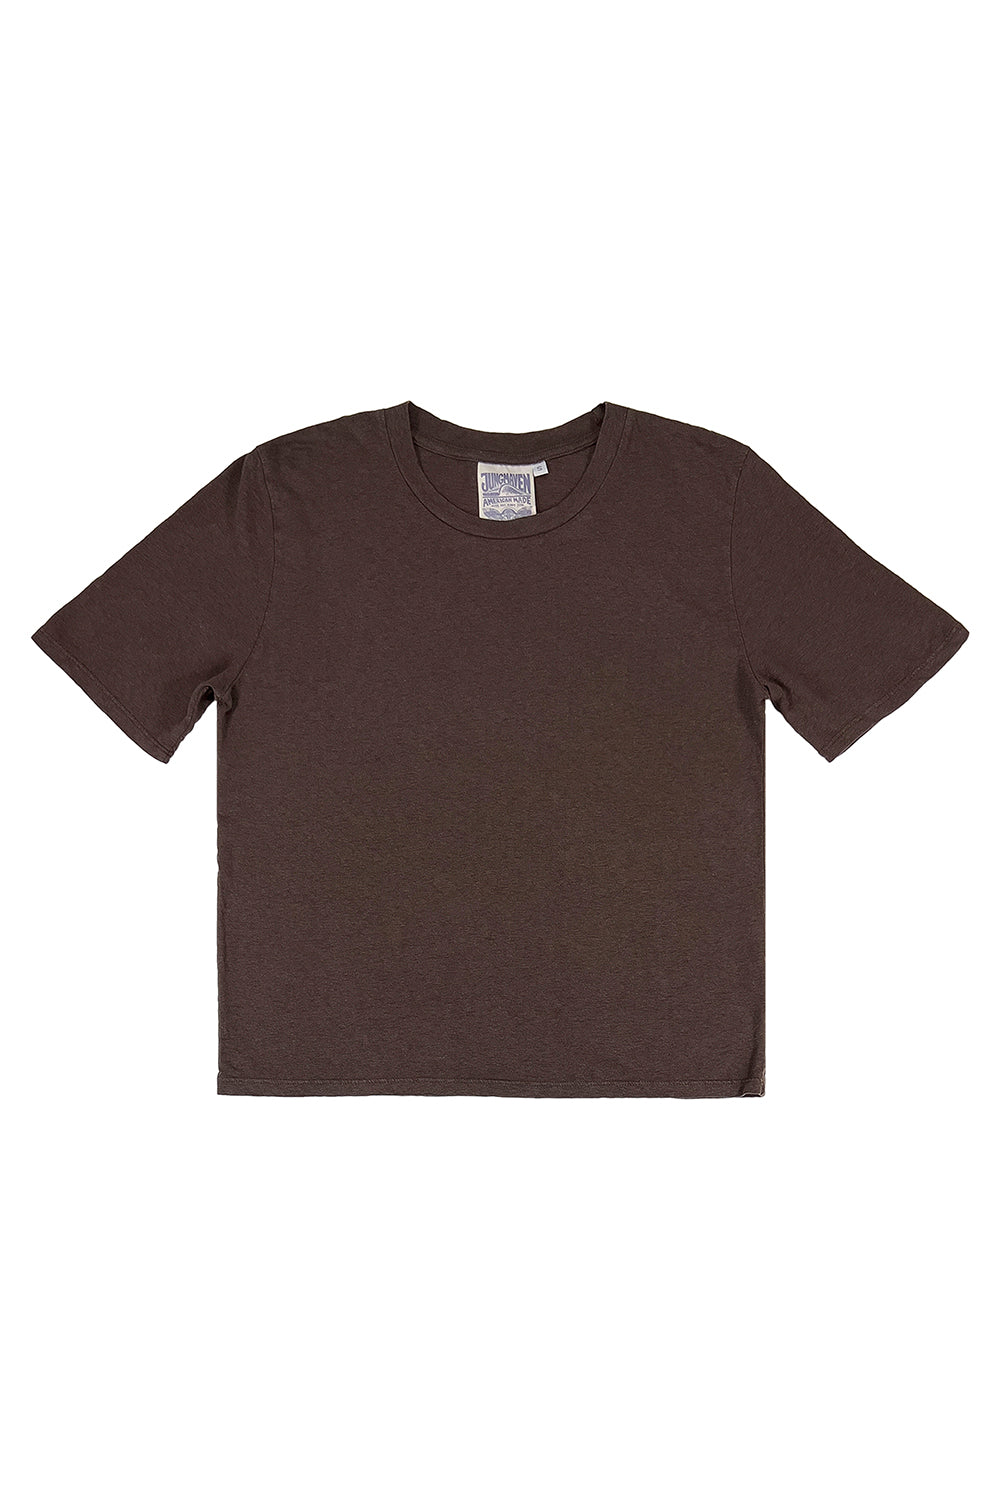 Silverlake Cropped Tee | Jungmaven Hemp Clothing & Accessories / Color: Coffee Bean